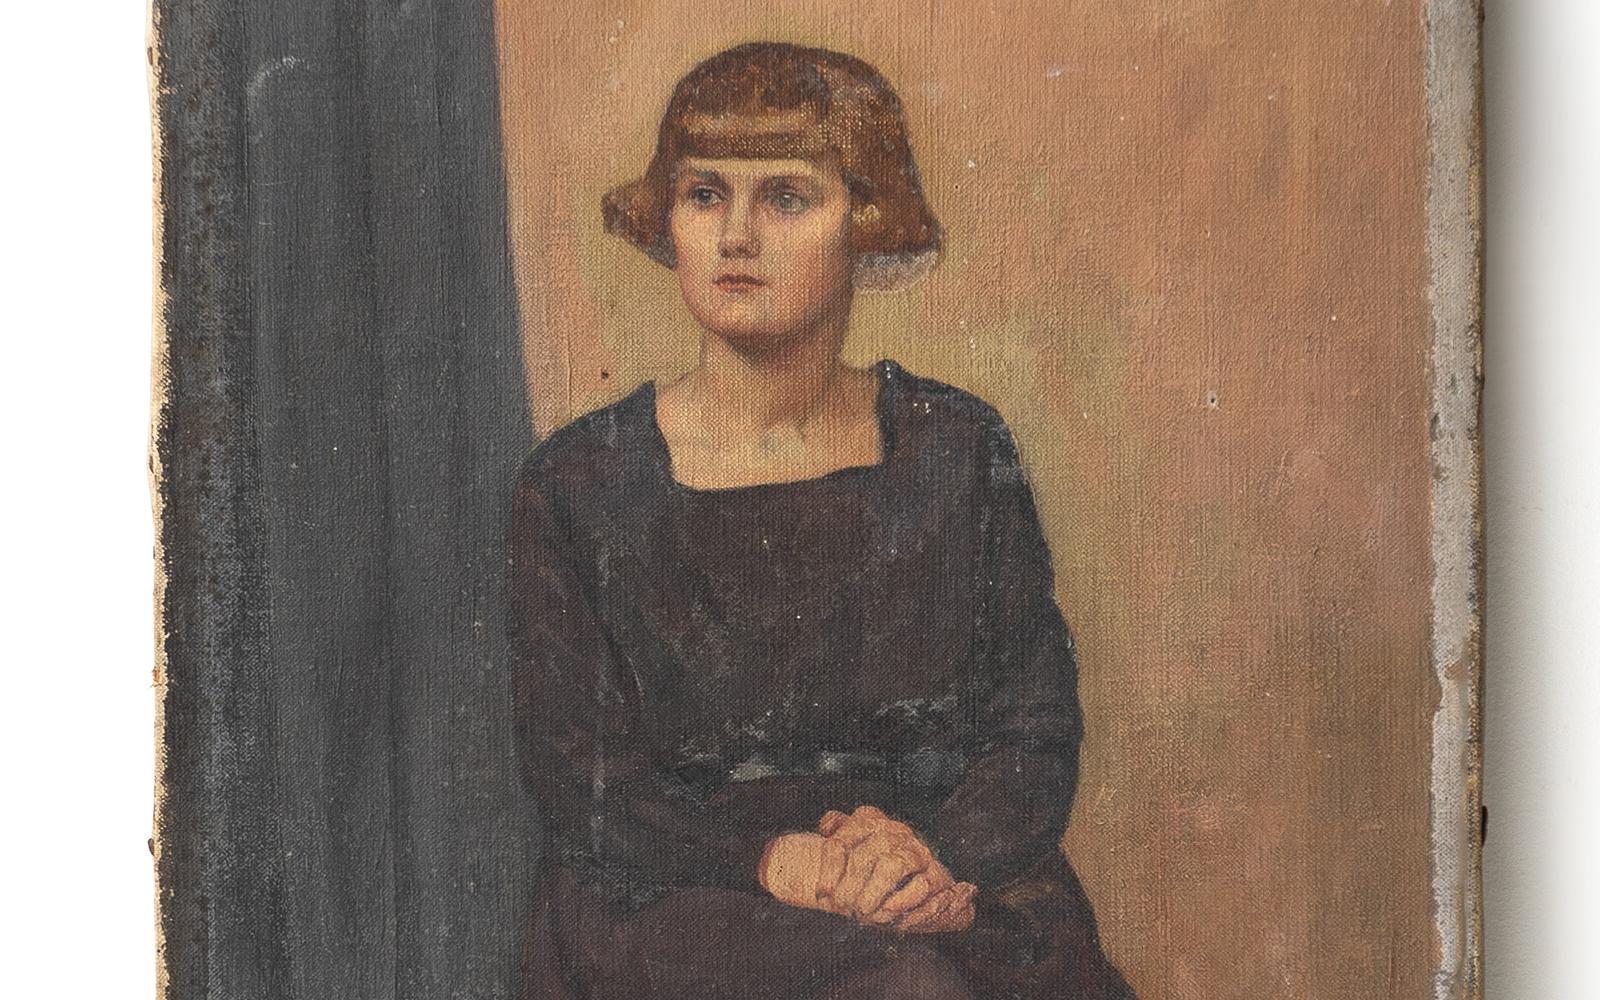 ANTIQUE ORIGINAL OIL ON CANVAS PAINTING DEPICTING A FEMALE SITTER BY ALYS WOODMAN (1897-1987) RBSA

Depicts a stylish woman in a typical 1920s dress, stockings, black leather Mary Jane shoes and sporting a short bob hairstyle. 

Painted when the